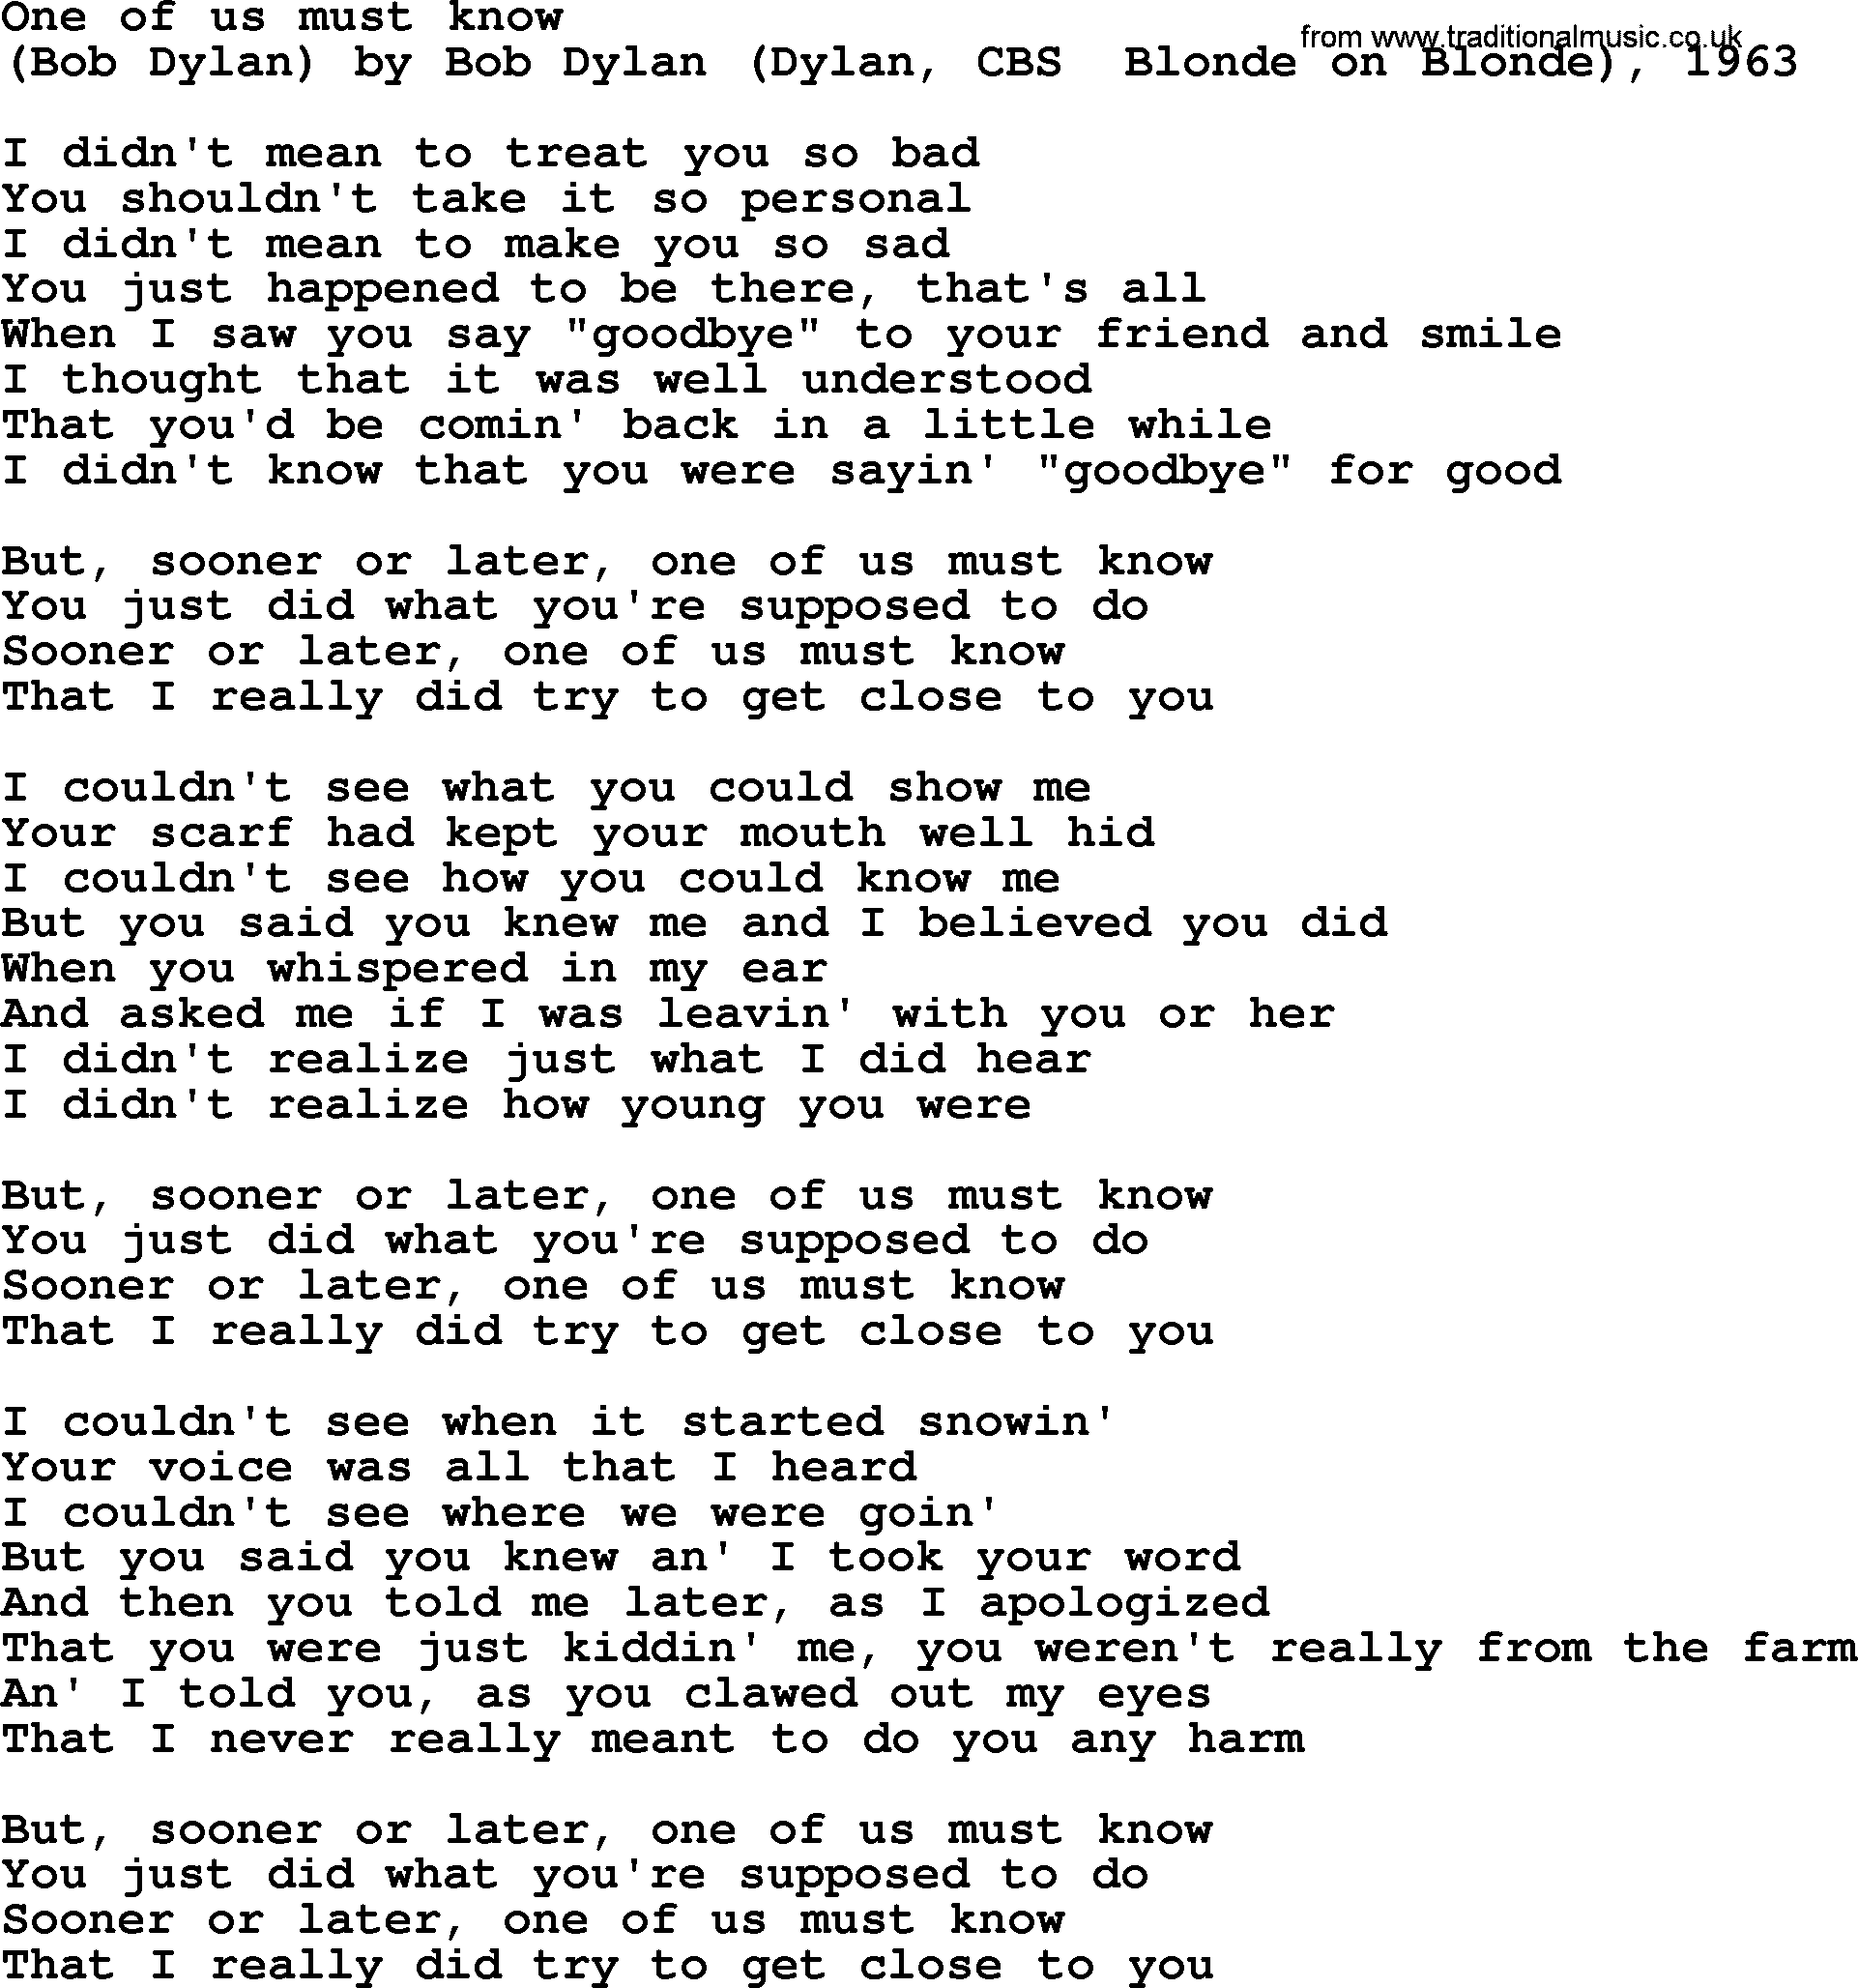 Bruce Springsteen song: One Of Us Must Know lyrics